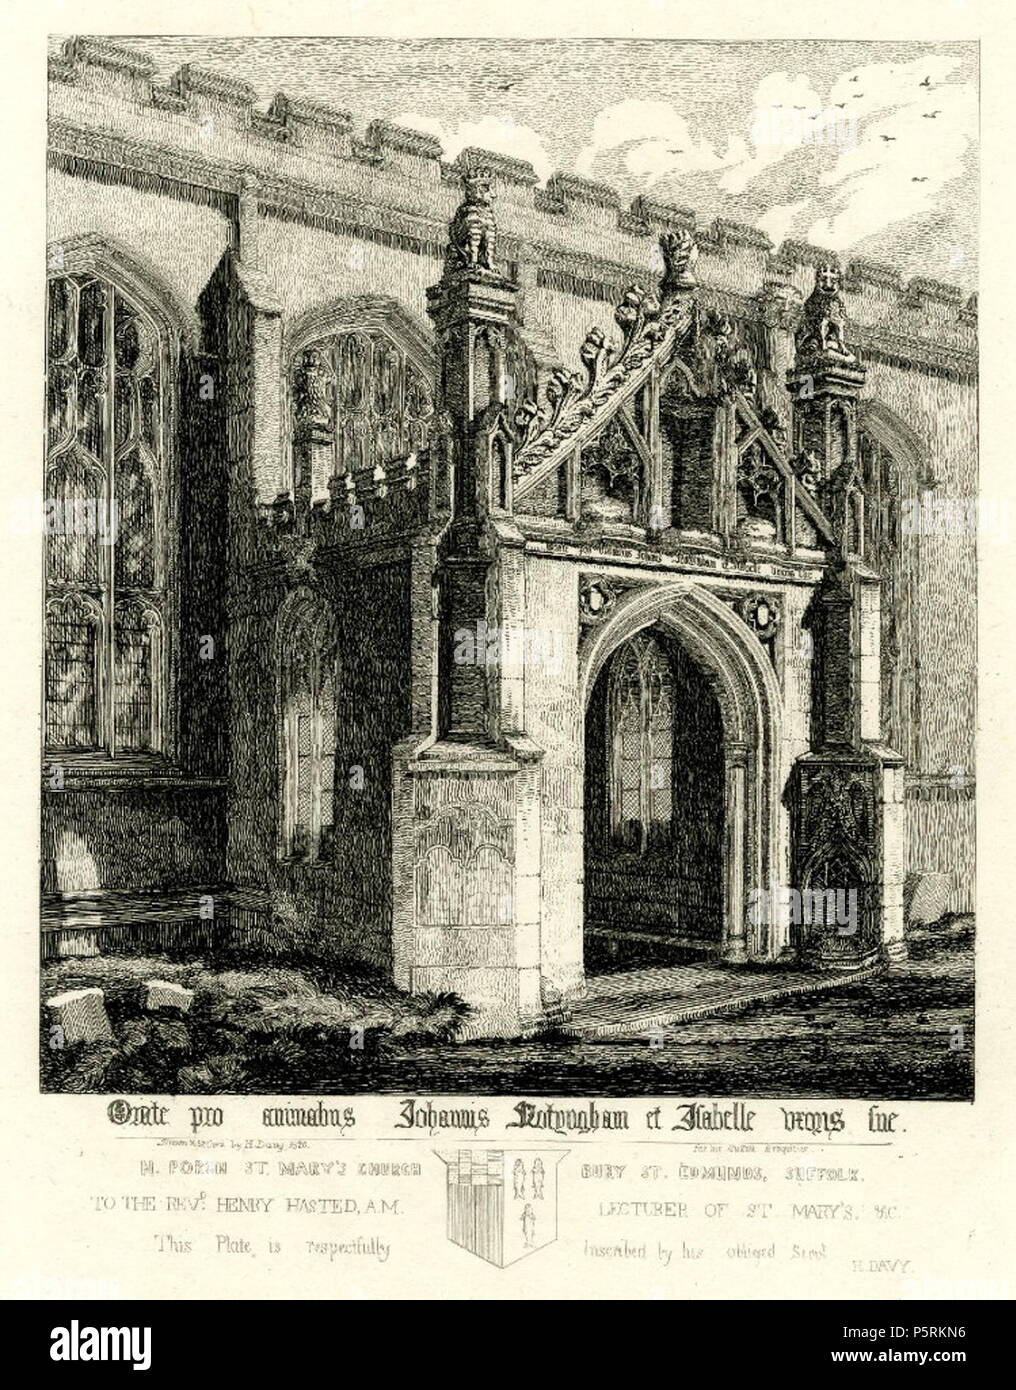 N/A. English: 'North Porch St Mary's Church Bury St Edmunds, Suffolk,' etching, by the British printmaker Henry Davy. 275 mm x 214 mm. Courtesy of the British Museum, London. 1827. Henry Davy 251 North Porch St Mary's Church Bury St Edmunds Suffolk by Henry Davy Stock Photo